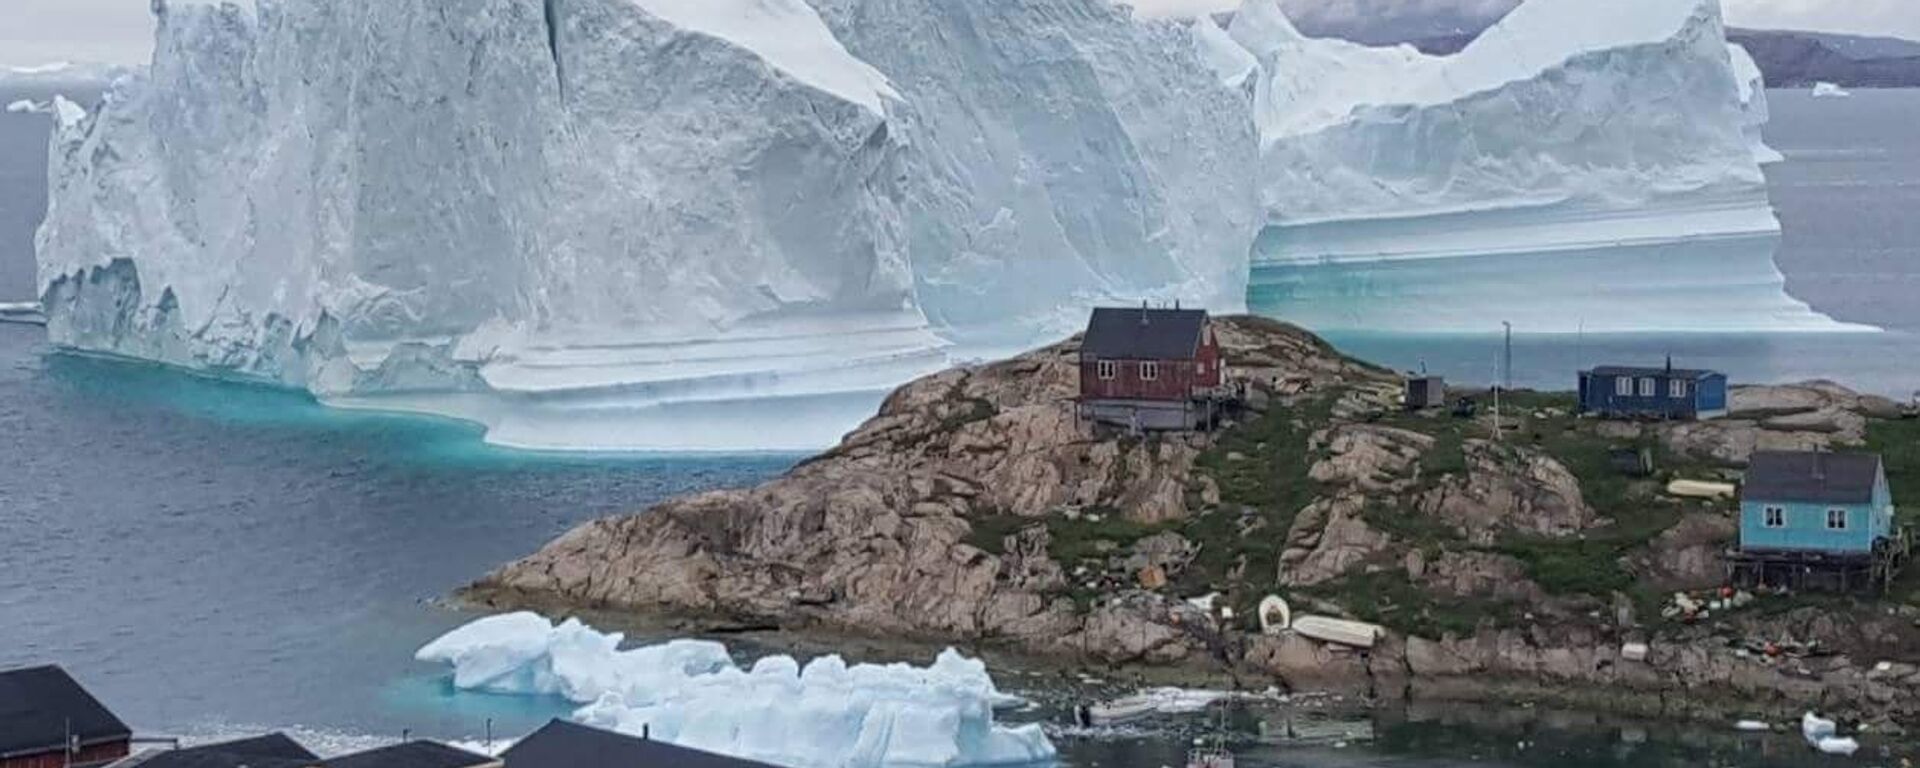 A picture taken on July 13, 2018 shows an iceberg behind houses and buildings after it grounded outside the village of Innarsuit, an island settlement in the Avannaata municipality in northwestern Greenland. - Sputnik International, 1920, 09.12.2020